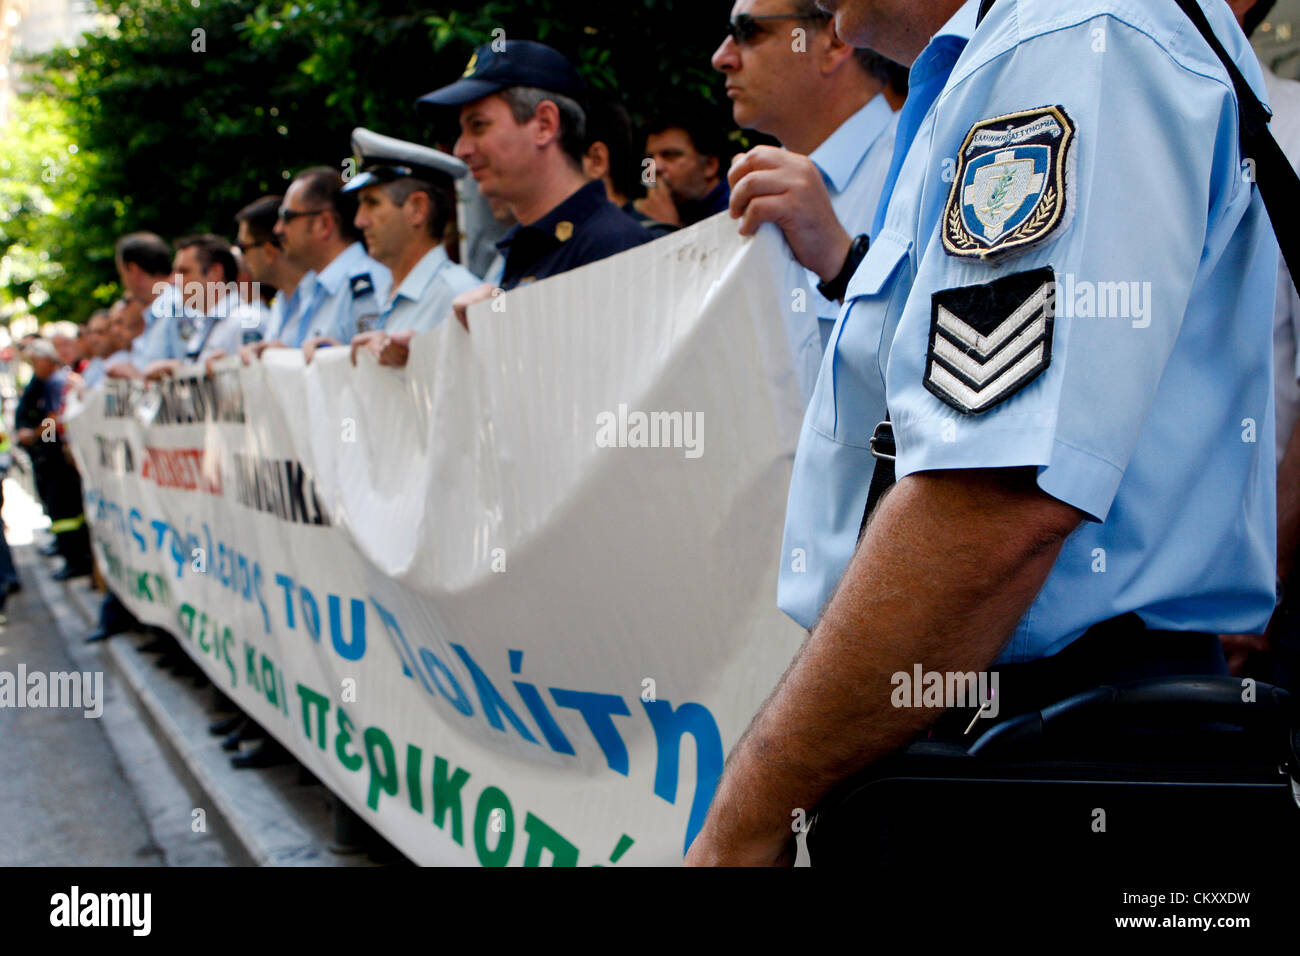 Athens, Greece. 31st Aug 2012. Police officers protest outside the Finance Ministry in the center of Athens. Police associations staged the protest against a new round of public sector pay cuts expected as part of a massive new Greek austerity package needed for the crisis hit country to continue receiving bailout loan installments. (Credit Image: Credit:  Aristidis Vafeiadakis/ZUMAPRESS.com/Alamy Live News) Stock Photo